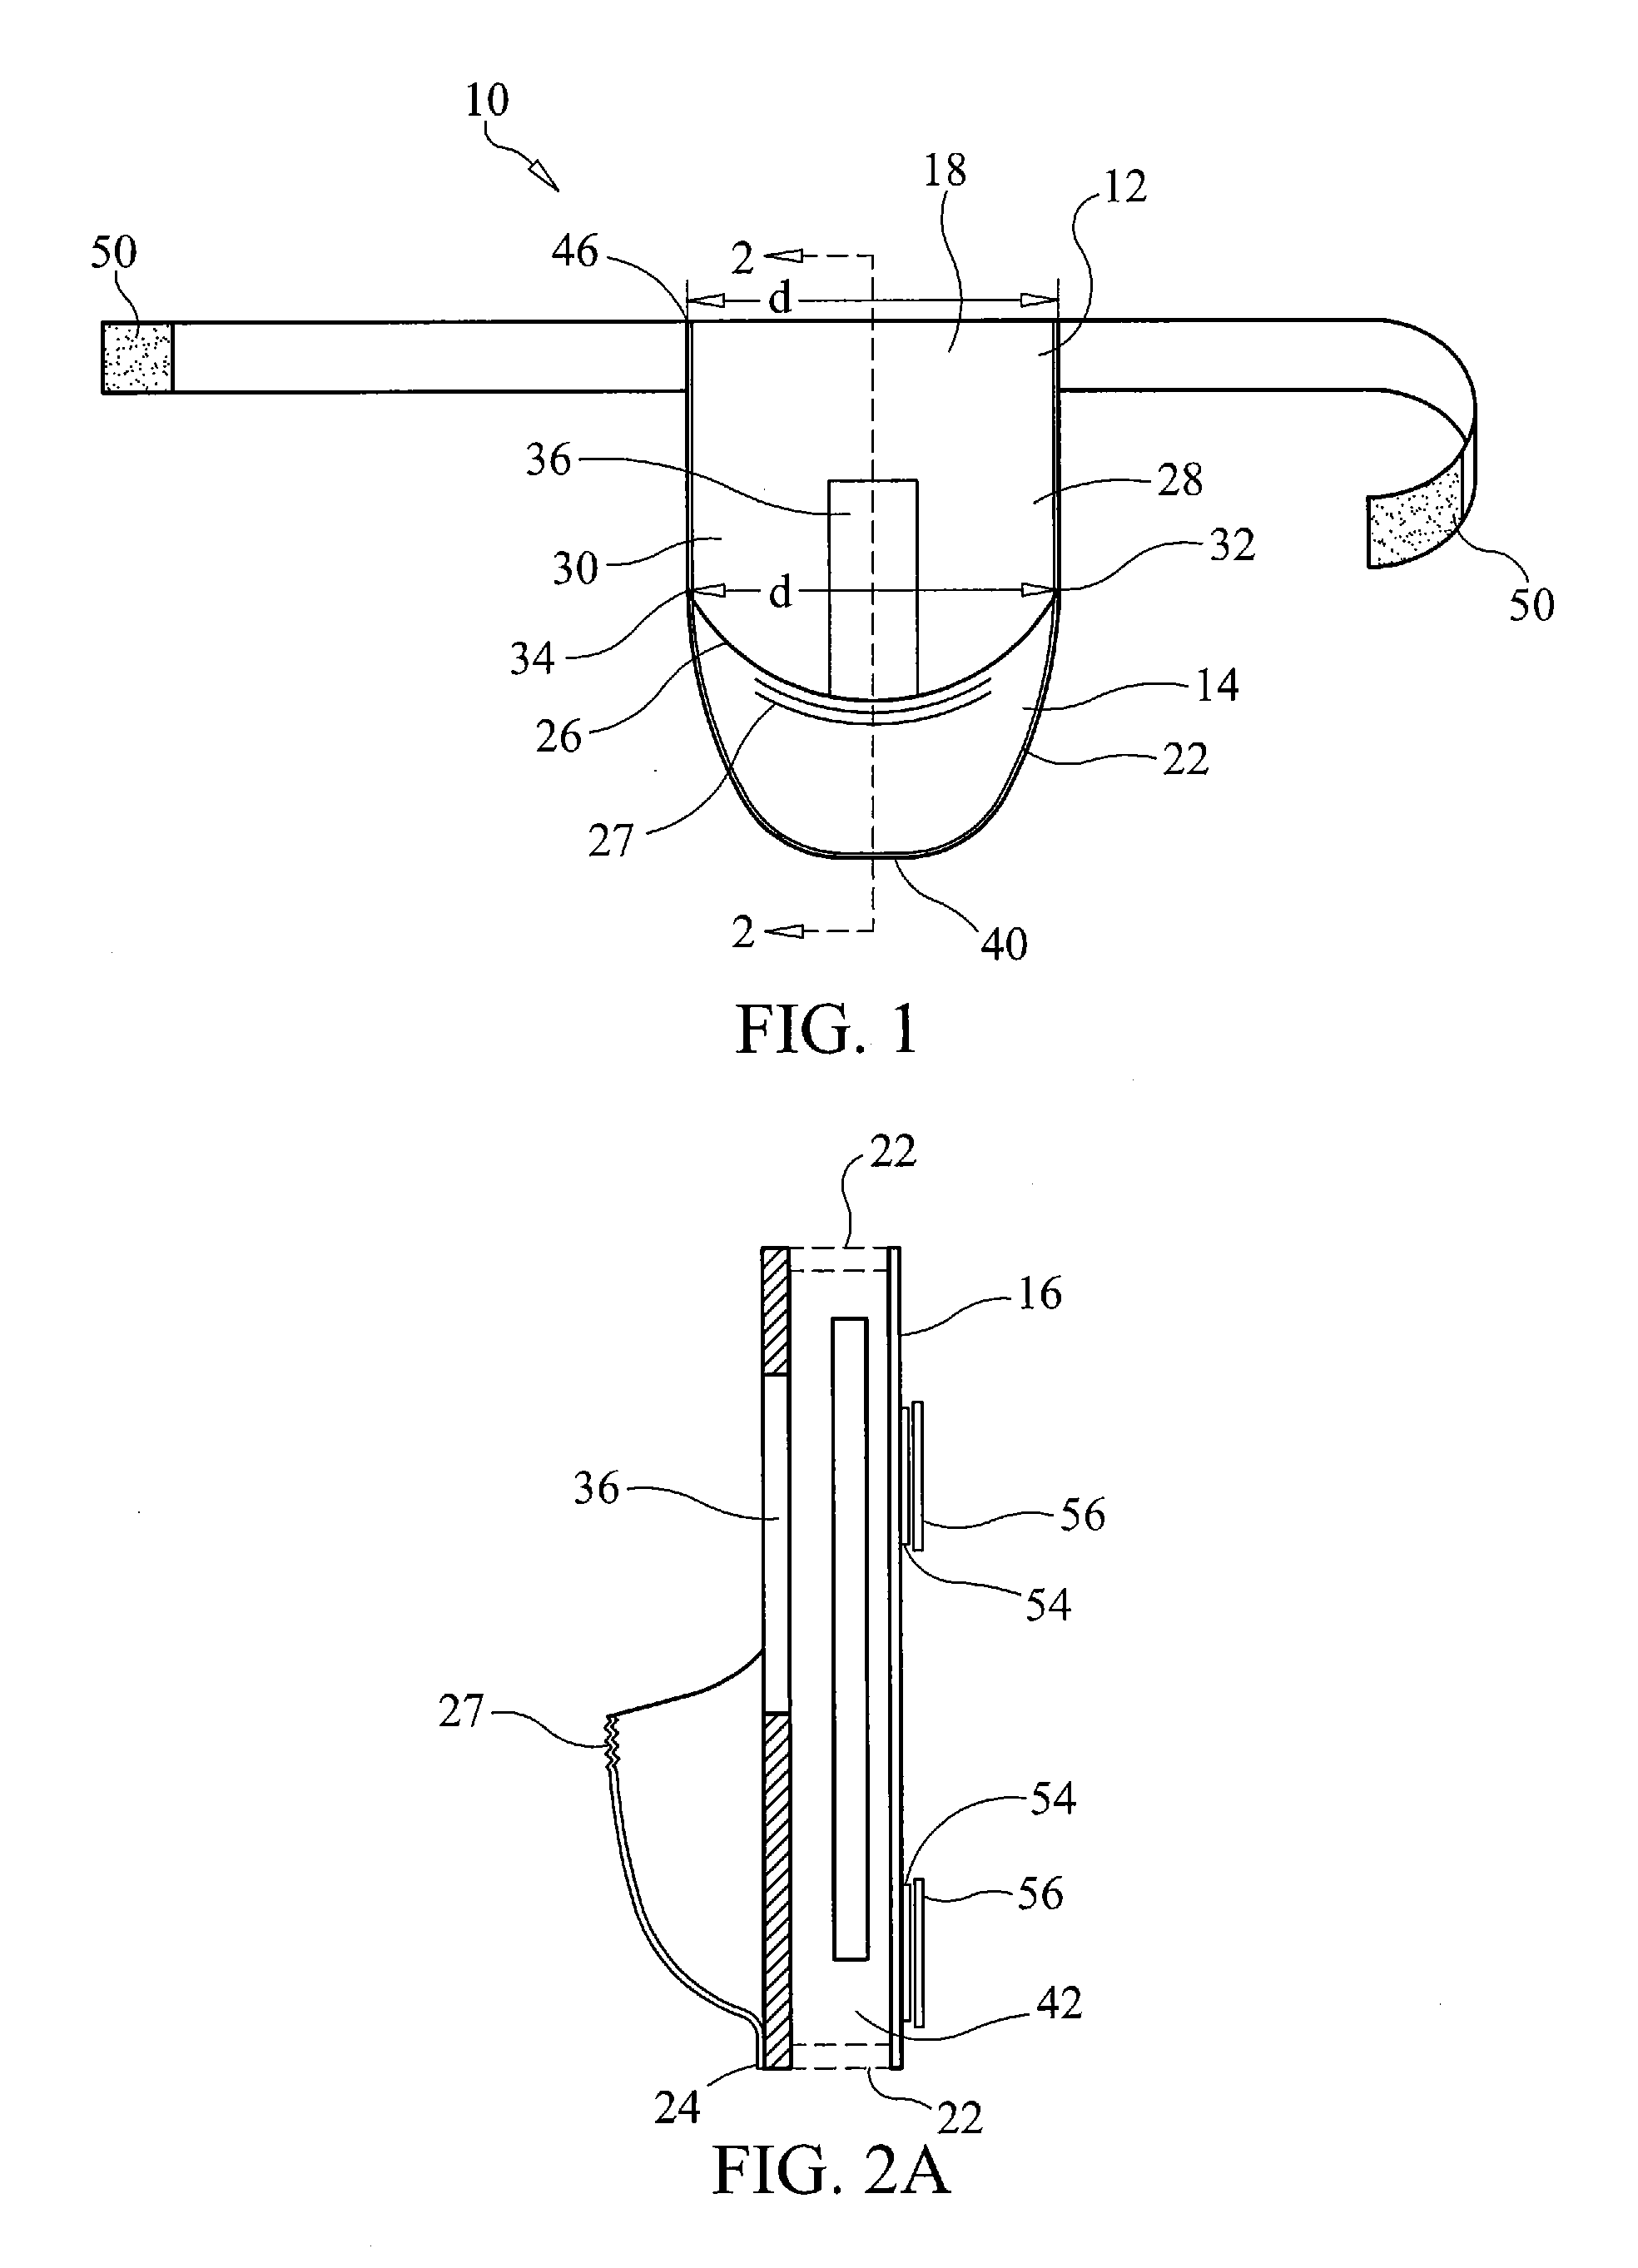 Incontinence device for ambulatory males